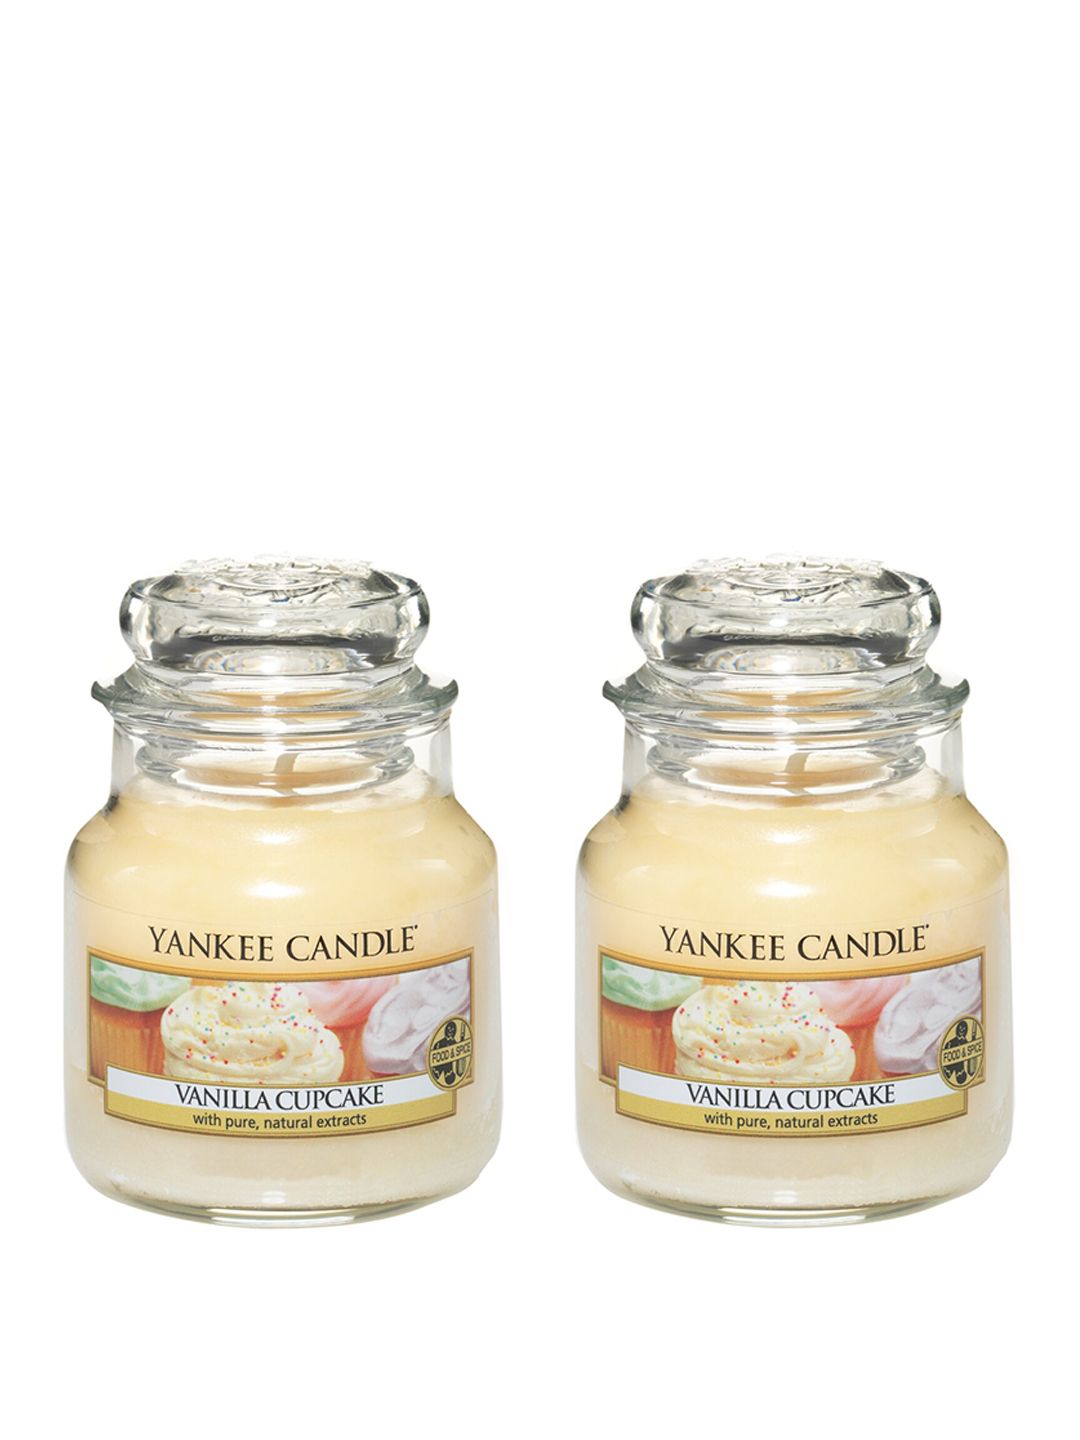 YANKEE CANDLE Set of 2 Classic Jar Vanilla Cupcake Scented Candles Price in India